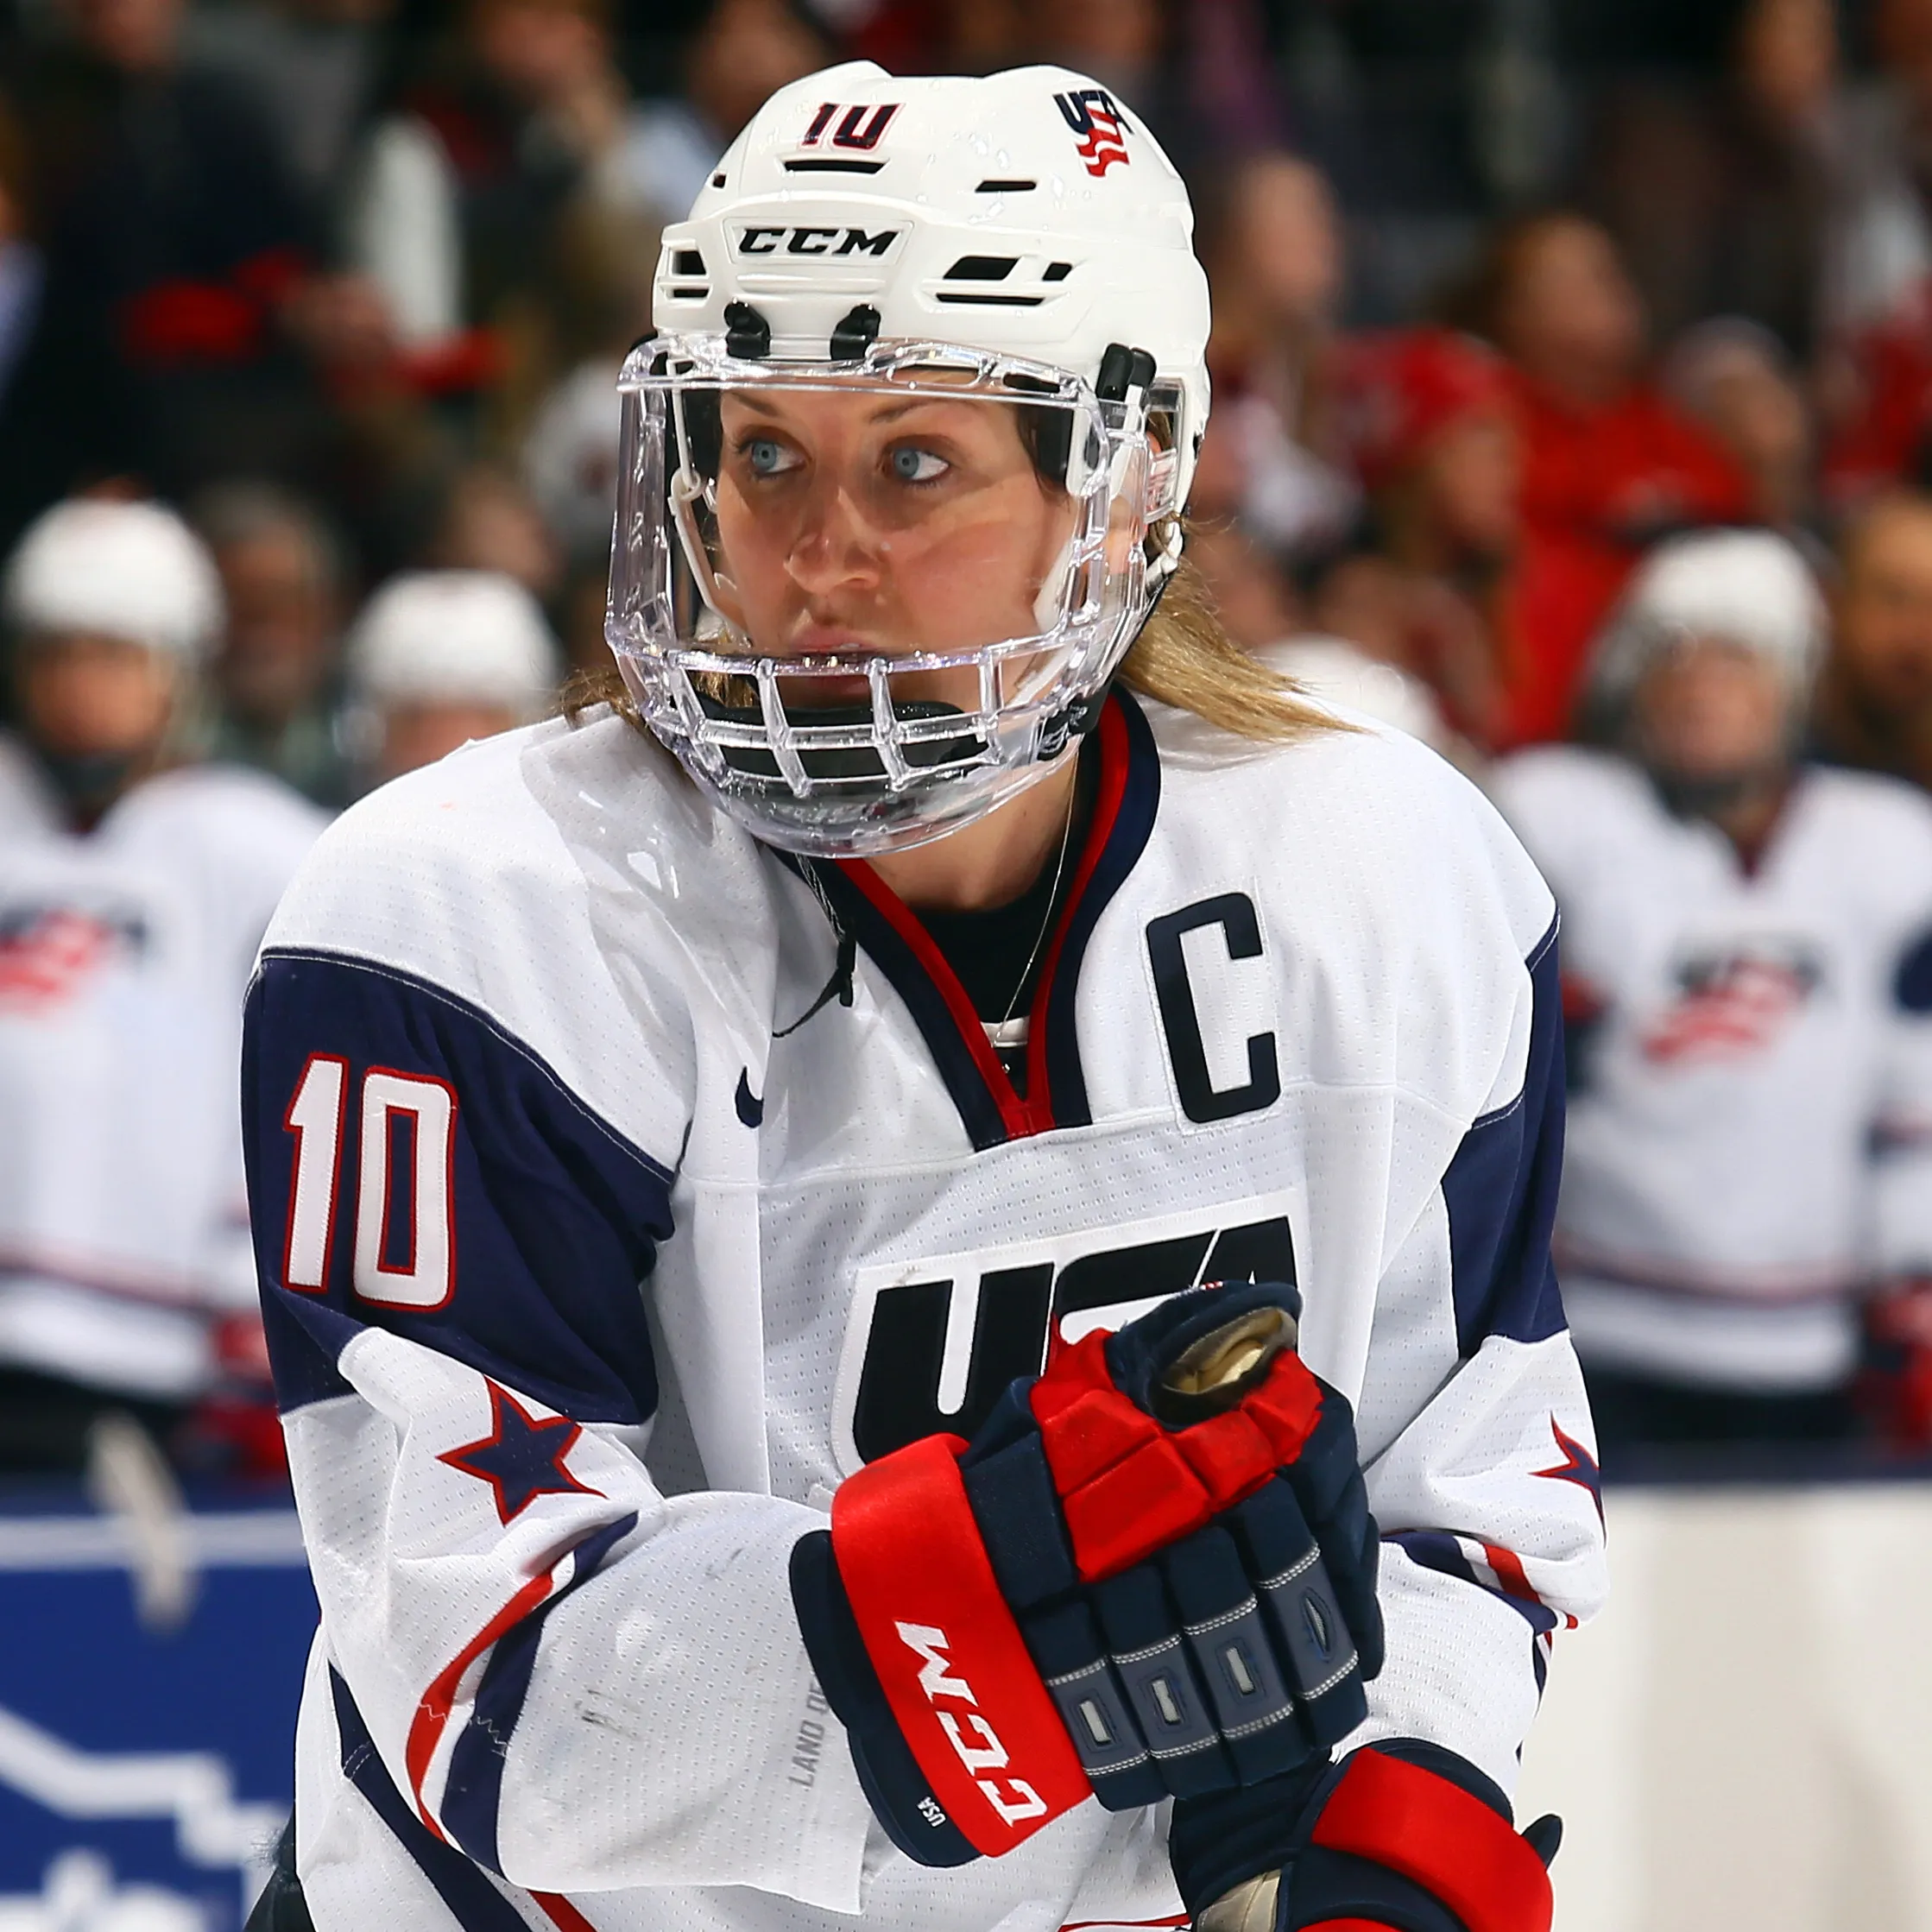 US women's hockey players stand firm in wage fight